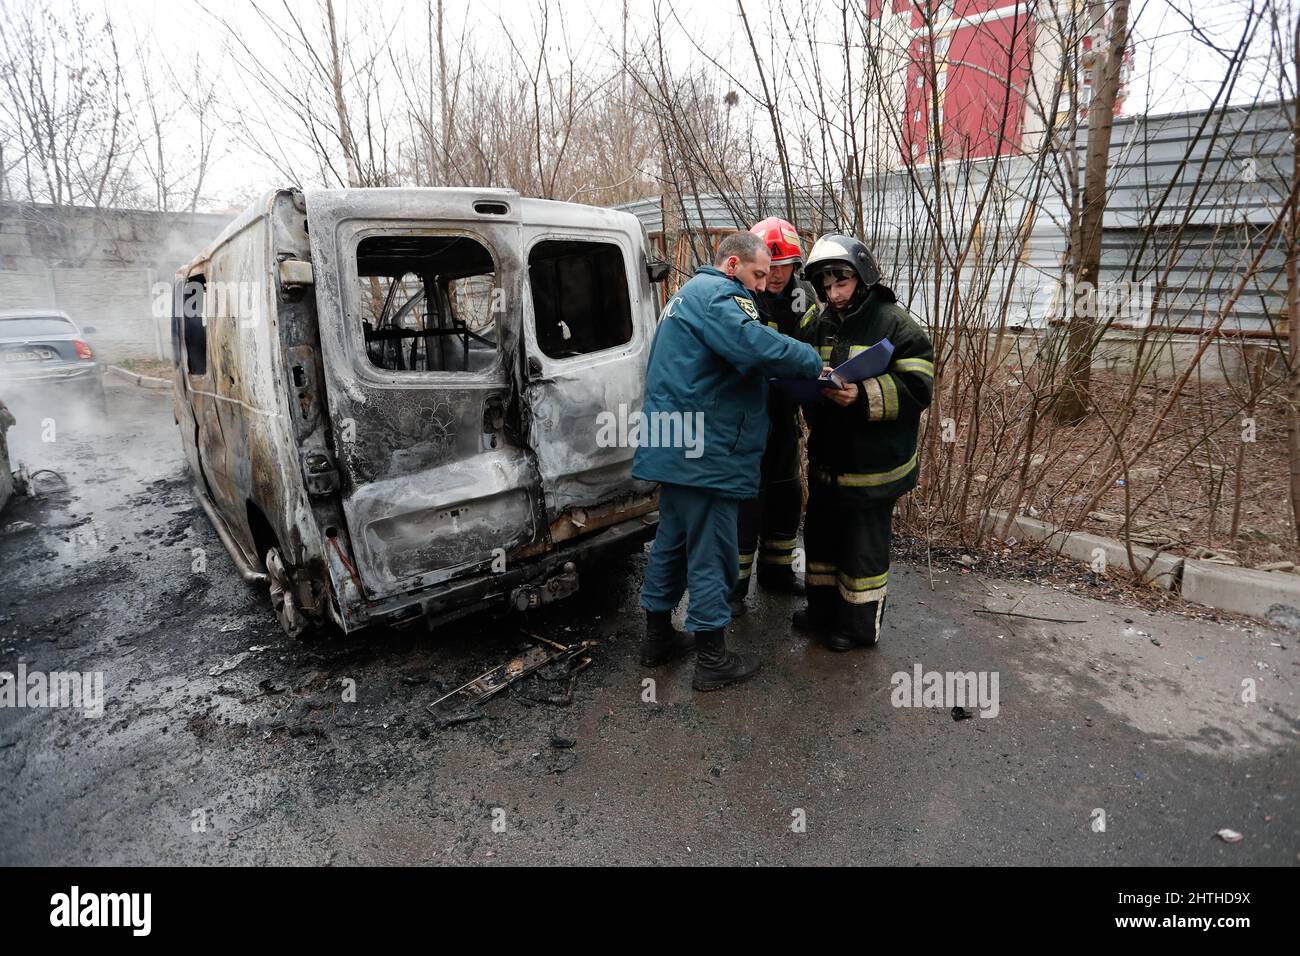 Donetsk. 28th Feb, 2022. Emergency workers stand near a burnt vehicle in Donetsk, Feb. 28, 2022. Credit: Victor/Xinhua/Alamy Live News Stock Photo